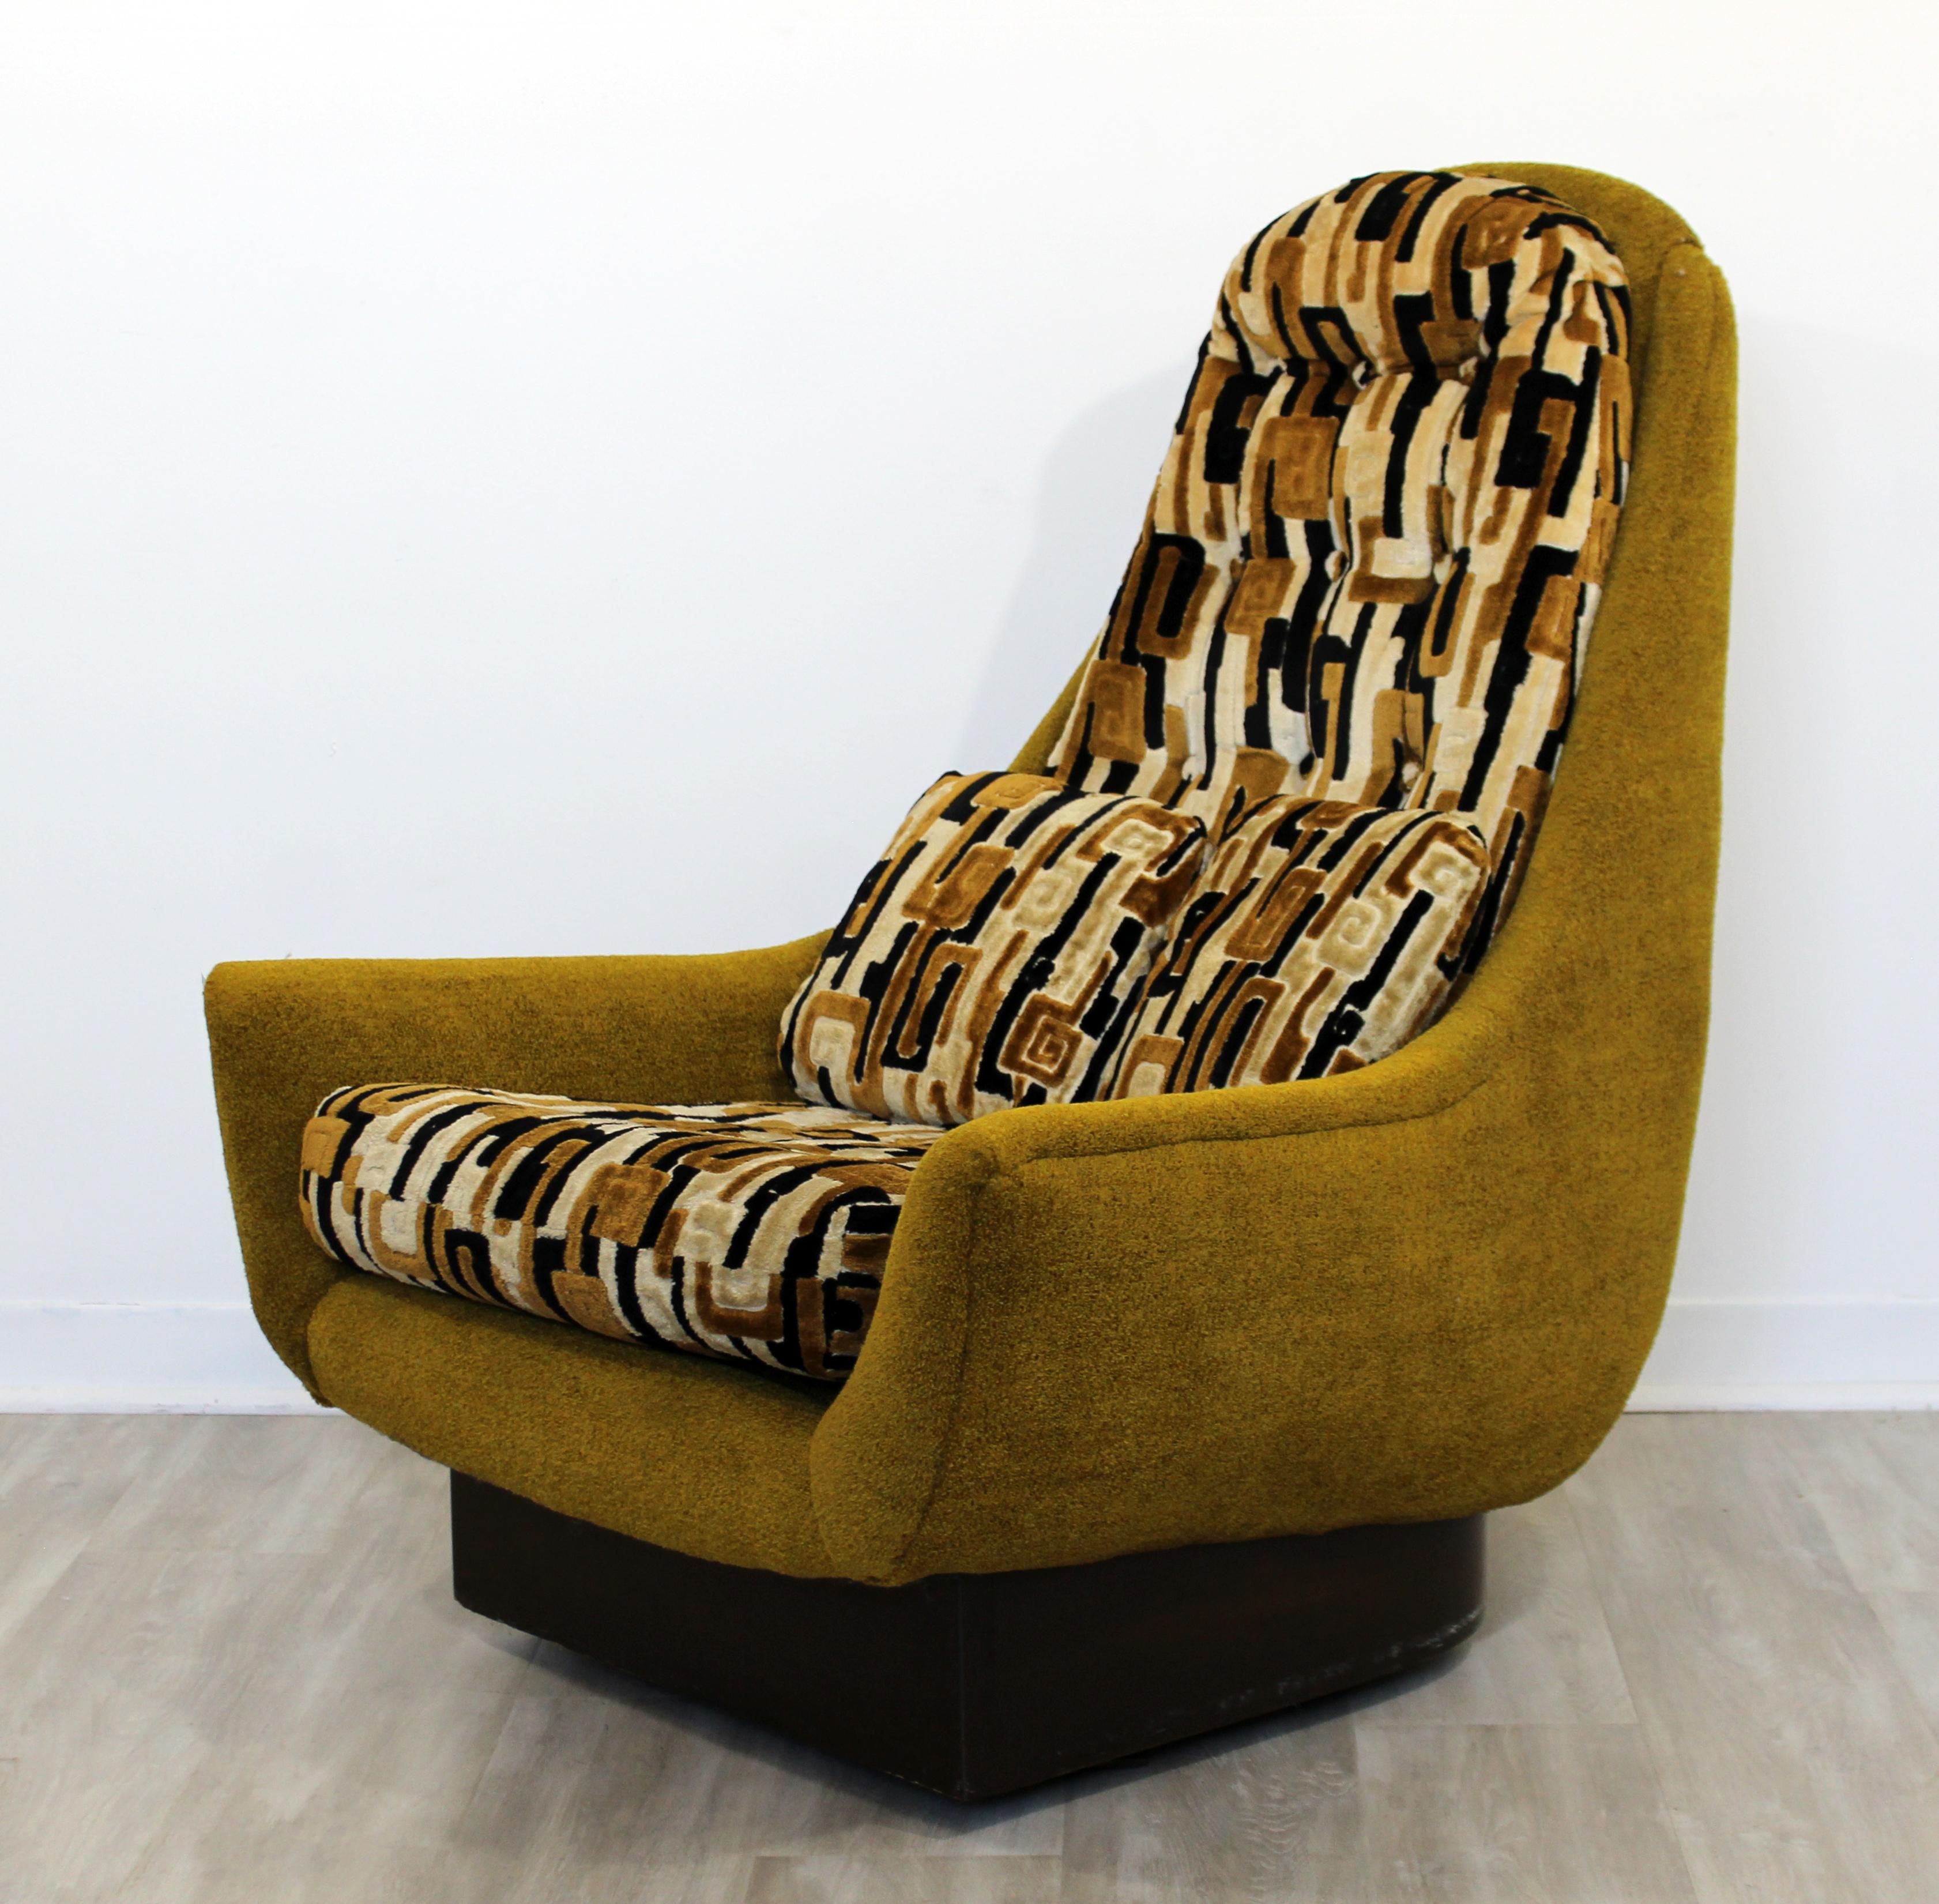 For your consideration is a great Adrian Pearsall style lounge armchair, on a plinth base, by International Furniture, circa 1960s. In very good vintage condition. The dimensions are 46